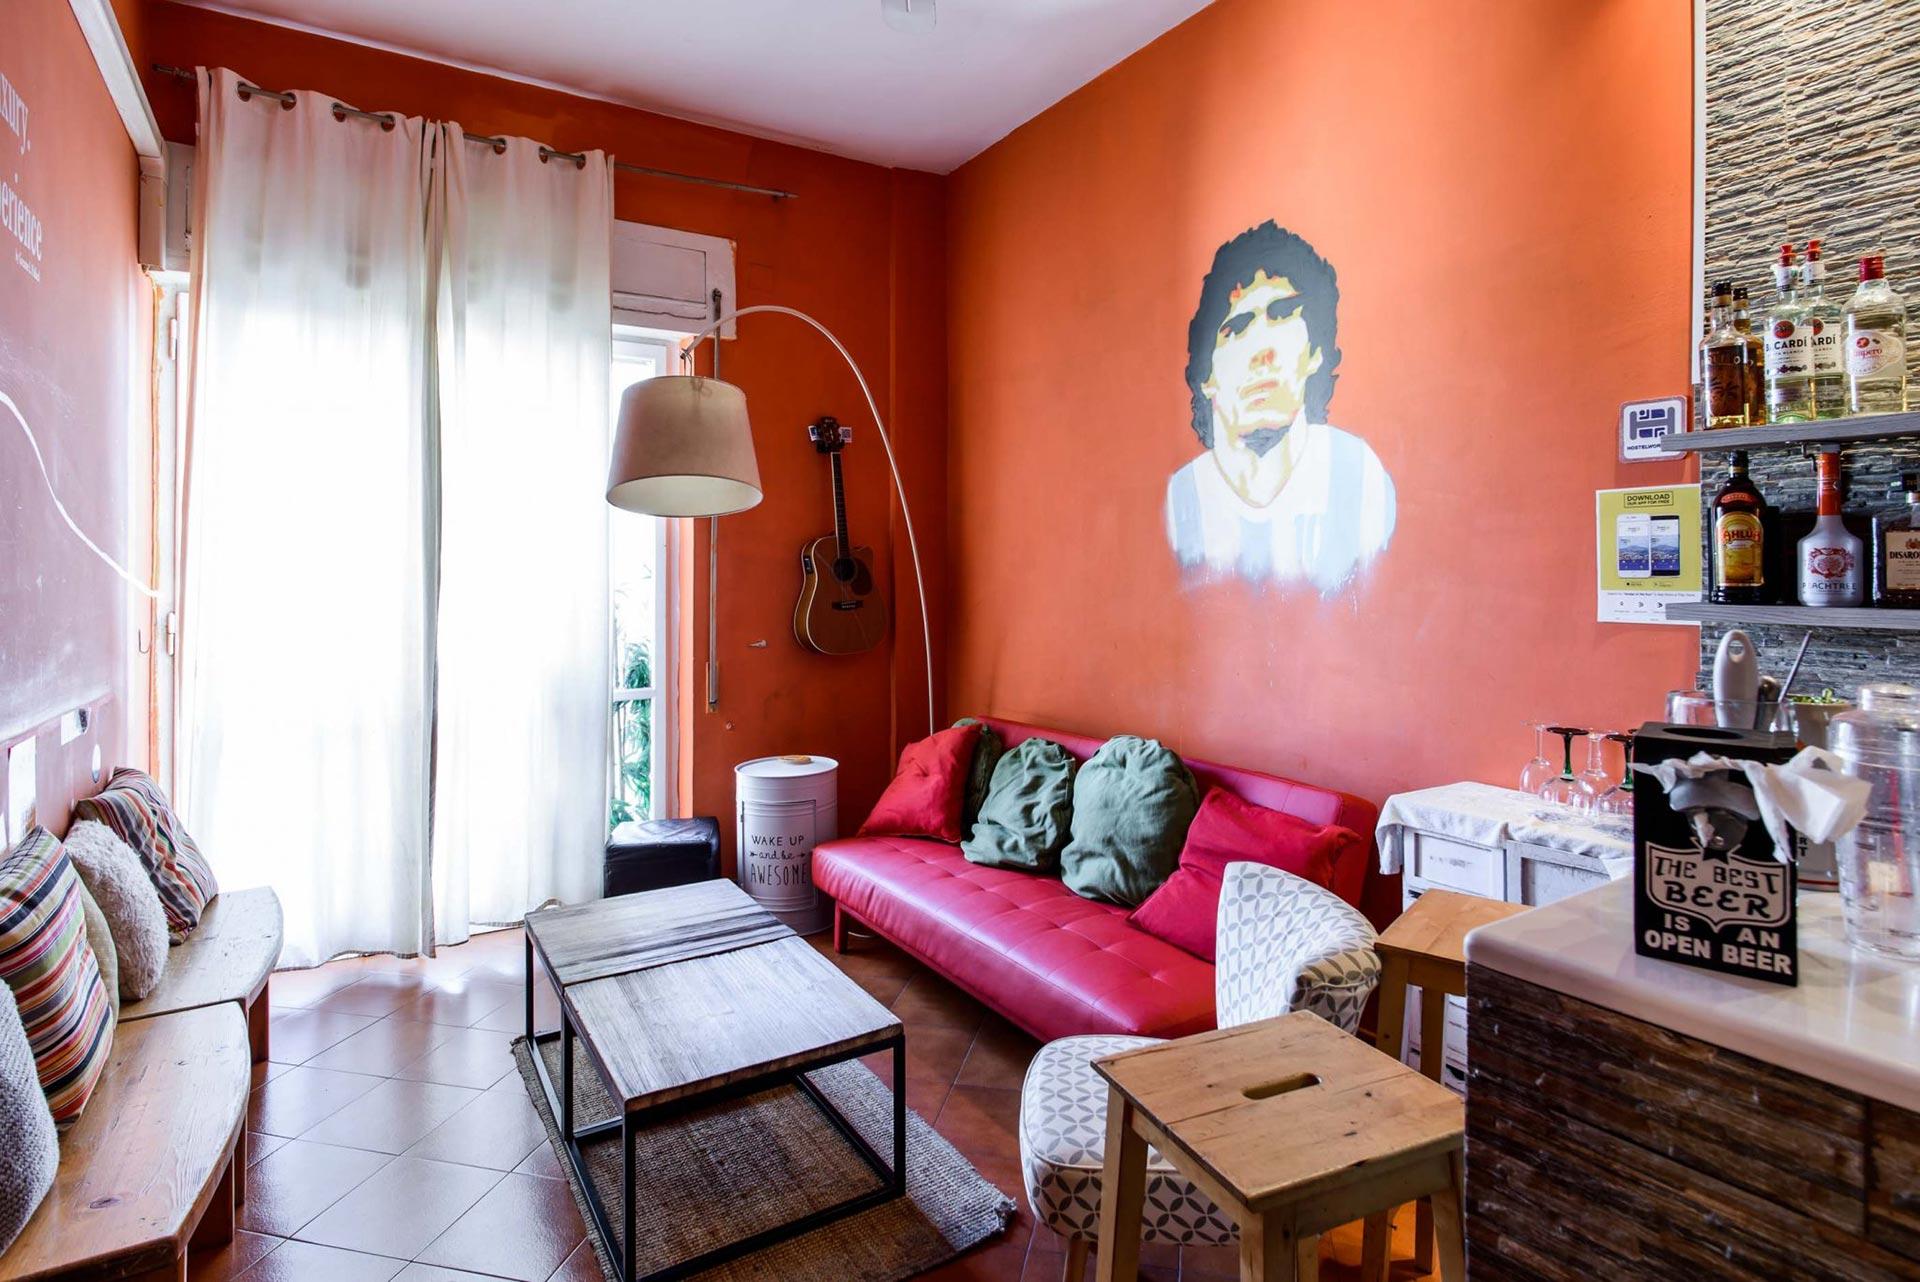 Accommodation in Naples